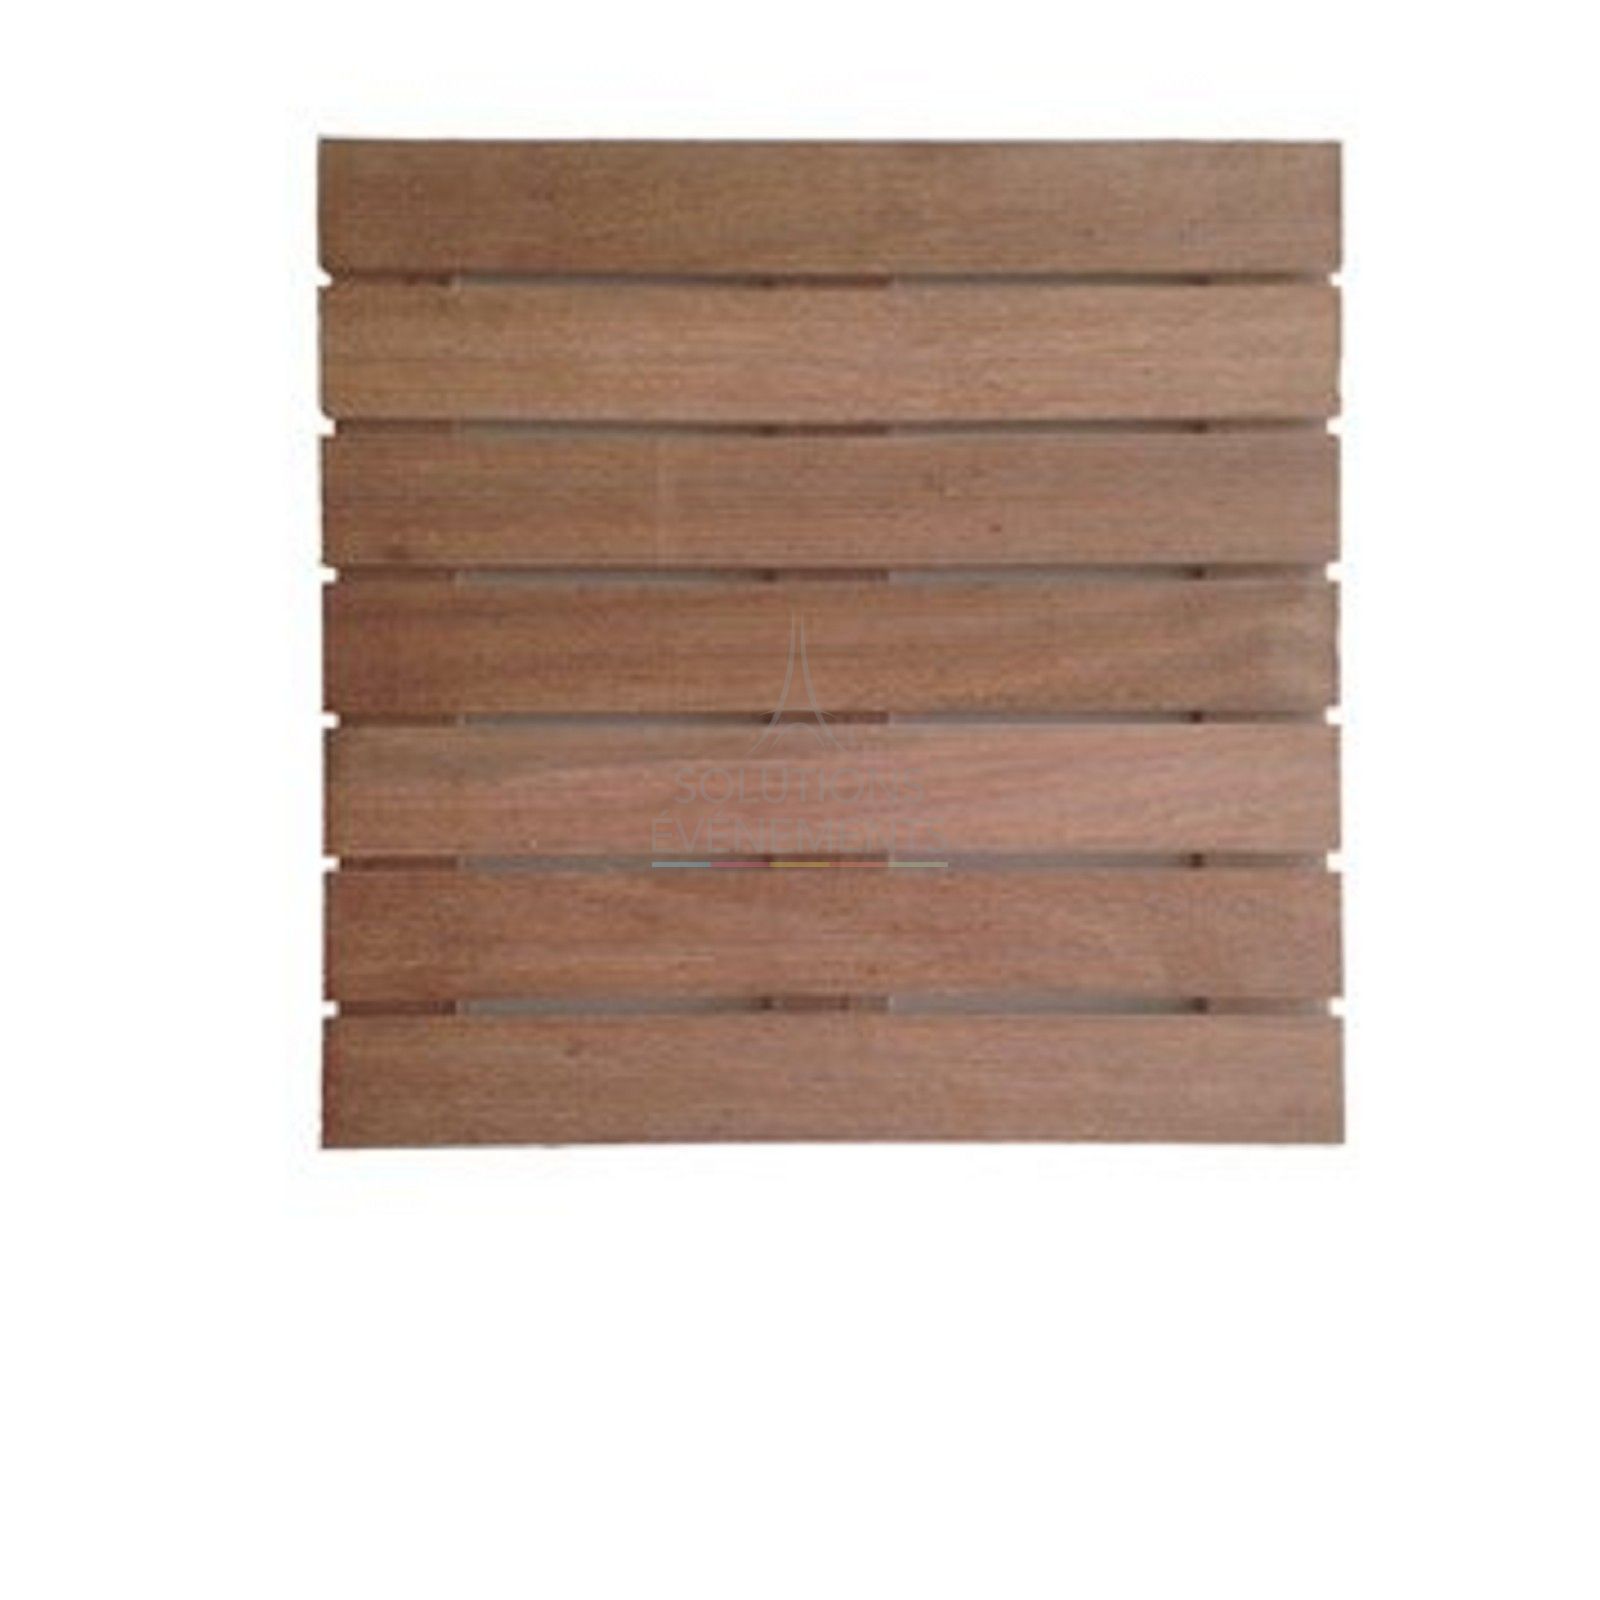 Rental of wooden gratings ideal for creating a terrace on an event.